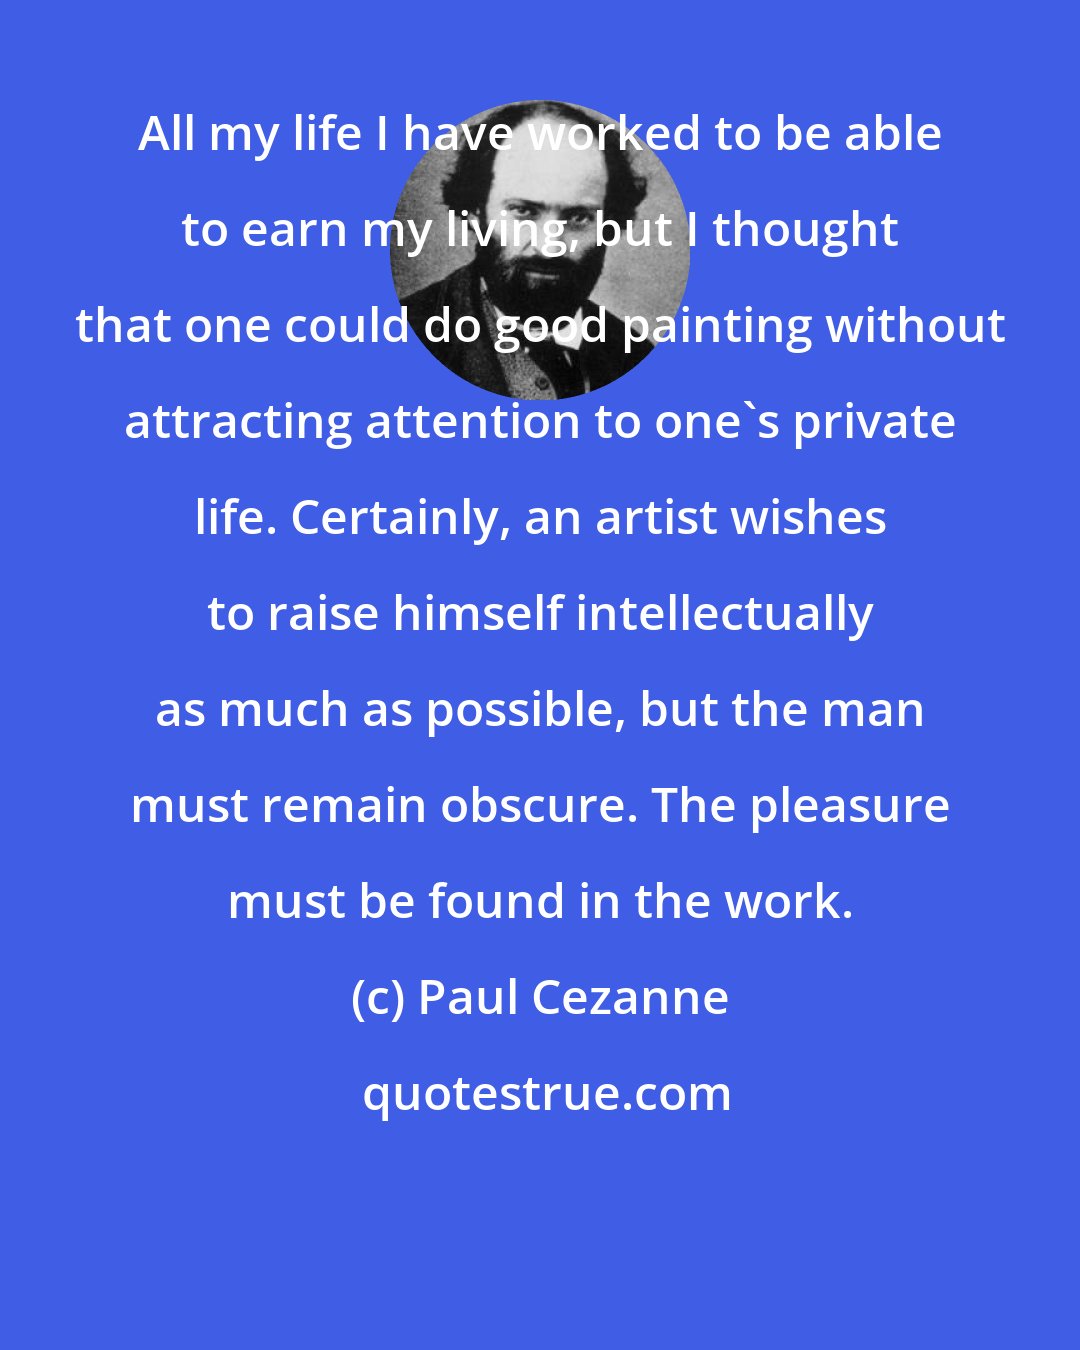 Paul Cezanne: All my life I have worked to be able to earn my living, but I thought that one could do good painting without attracting attention to one's private life. Certainly, an artist wishes to raise himself intellectually as much as possible, but the man must remain obscure. The pleasure must be found in the work.